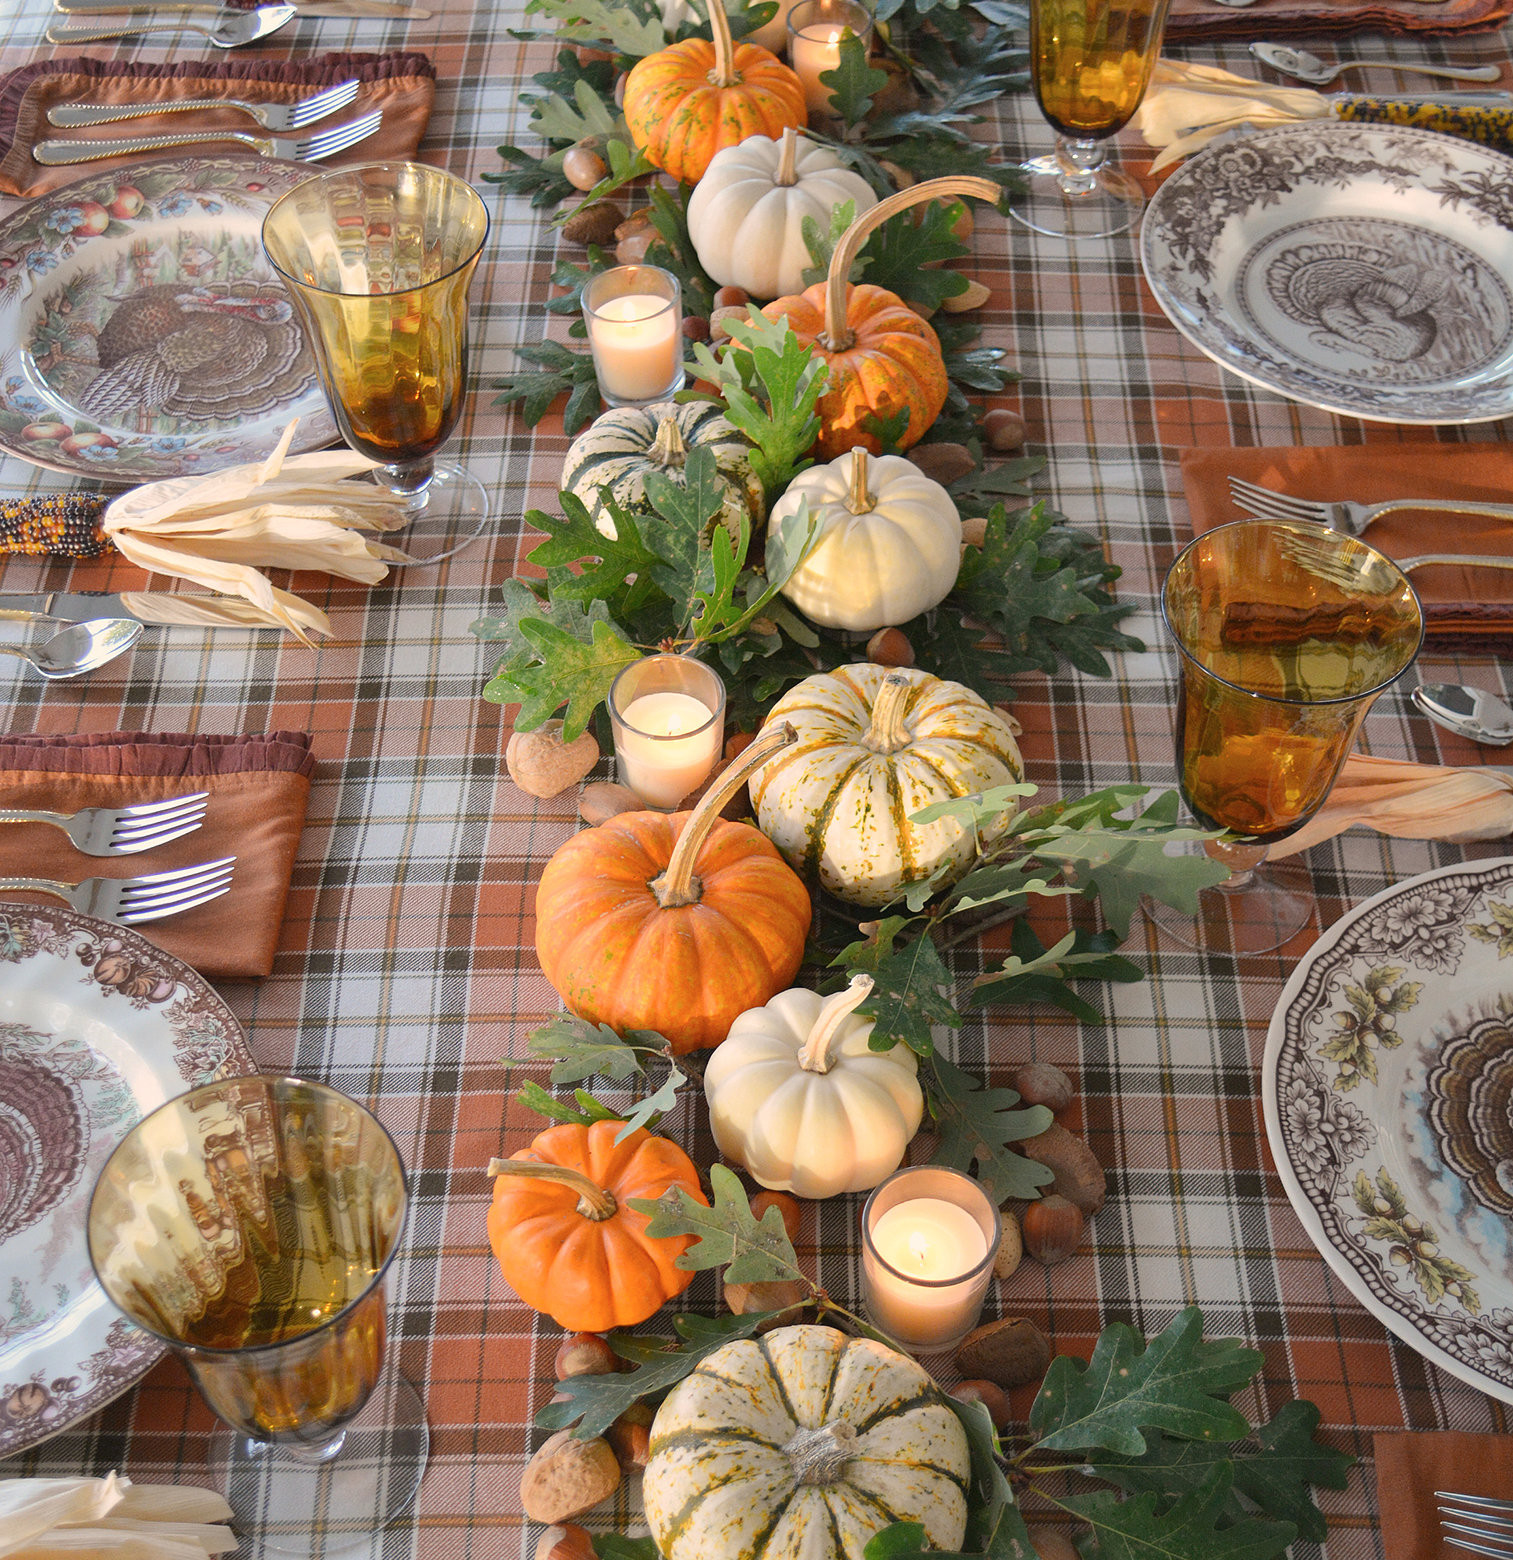 Easy Thanksgiving Table Decorations
 34 Stunning Thanksgiving Table Decor Ideas for 2019